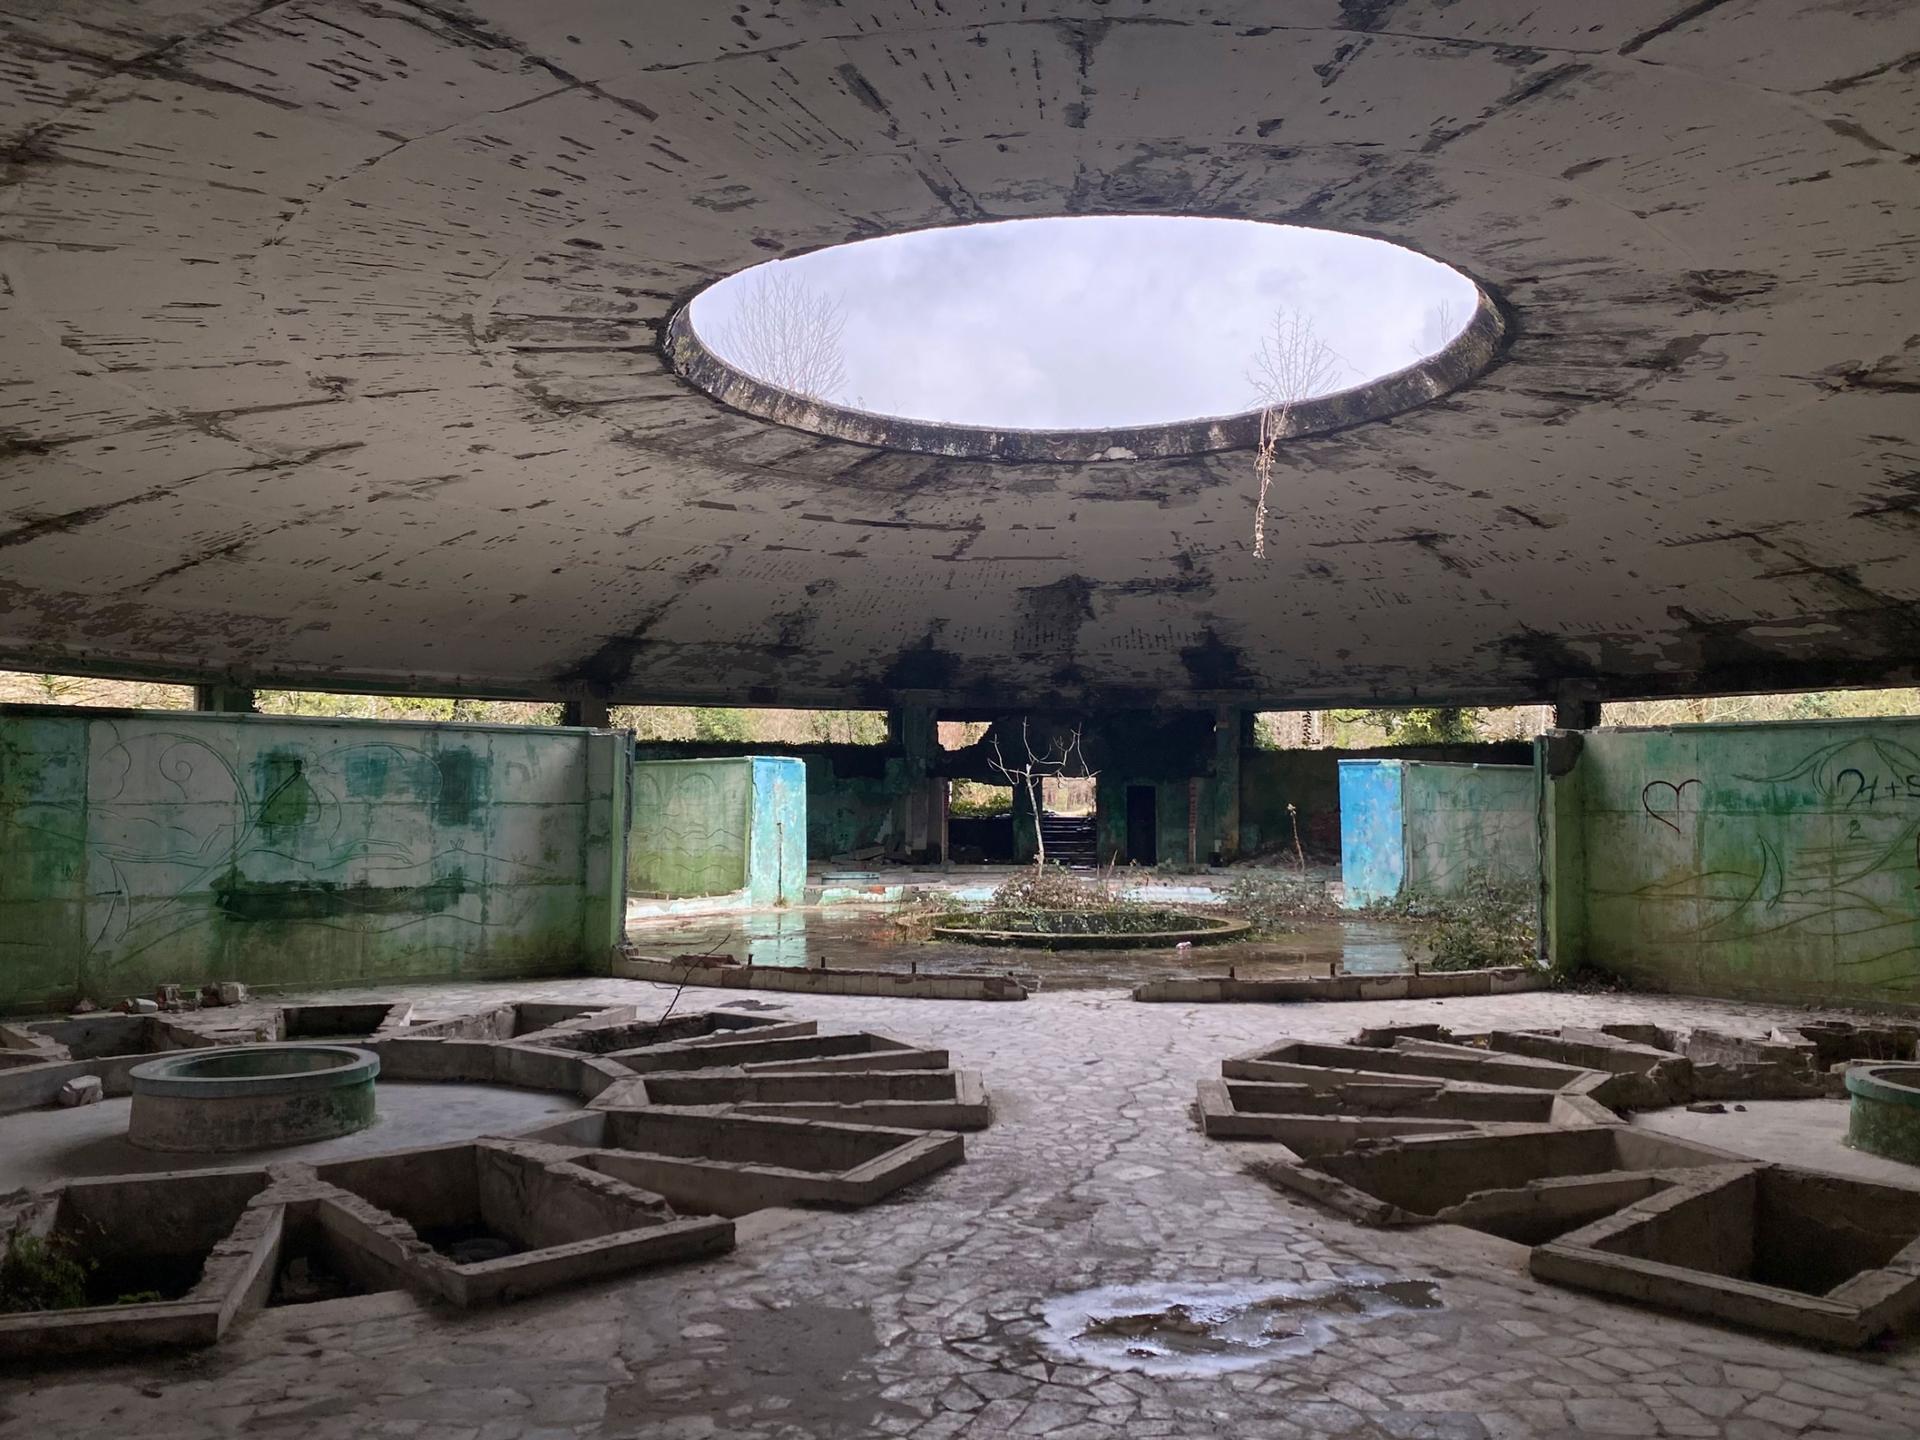 A former bathhouse in the town of Tskaltubo, Georgia. Workers once traveled from throughout the Soviet Union to bathe in the town's mineral waters which have healing properties.